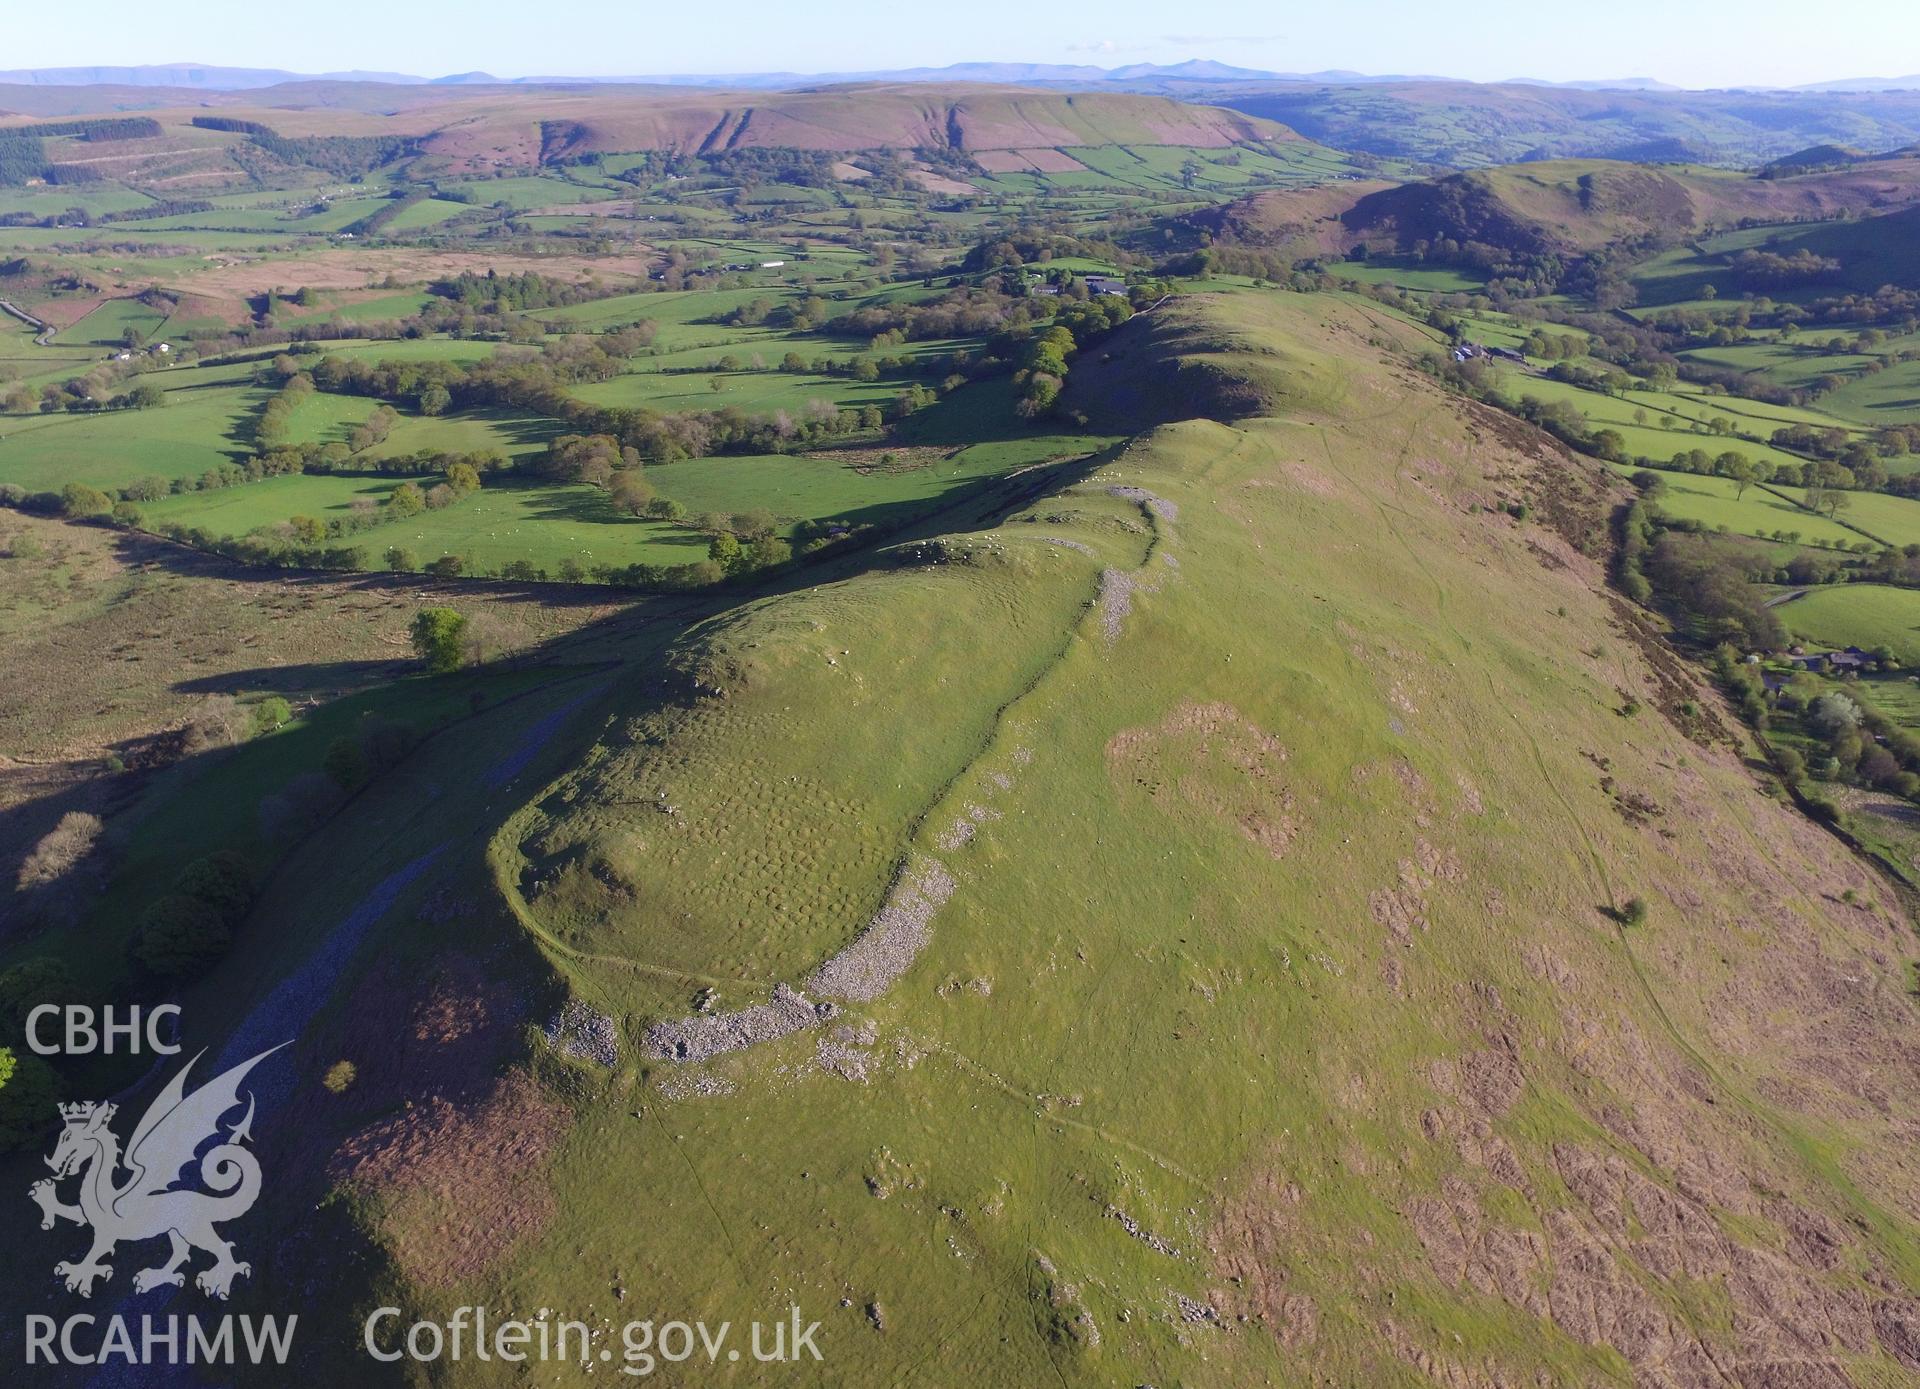 Colour photo showing aerial view of Castle Bank hillfort, Glasgwm, taken by Paul R. Davis, 13th May 2018.